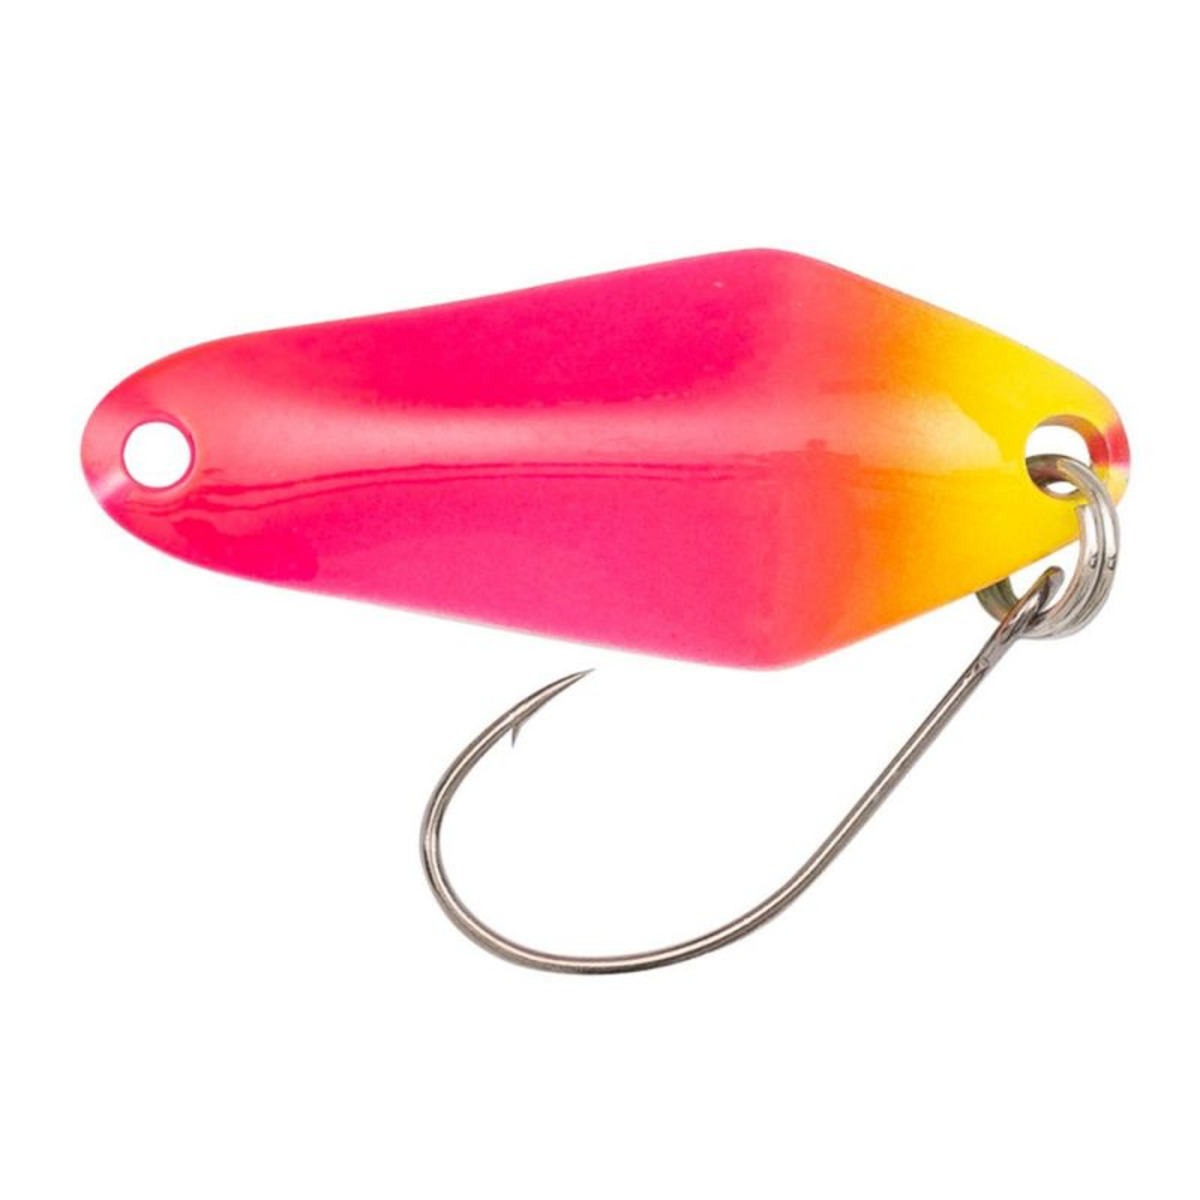 Berkley Area Game Spoons Chisai - 2.8 g - 2.87 cm - Chartreuse Front-Fucsia Back